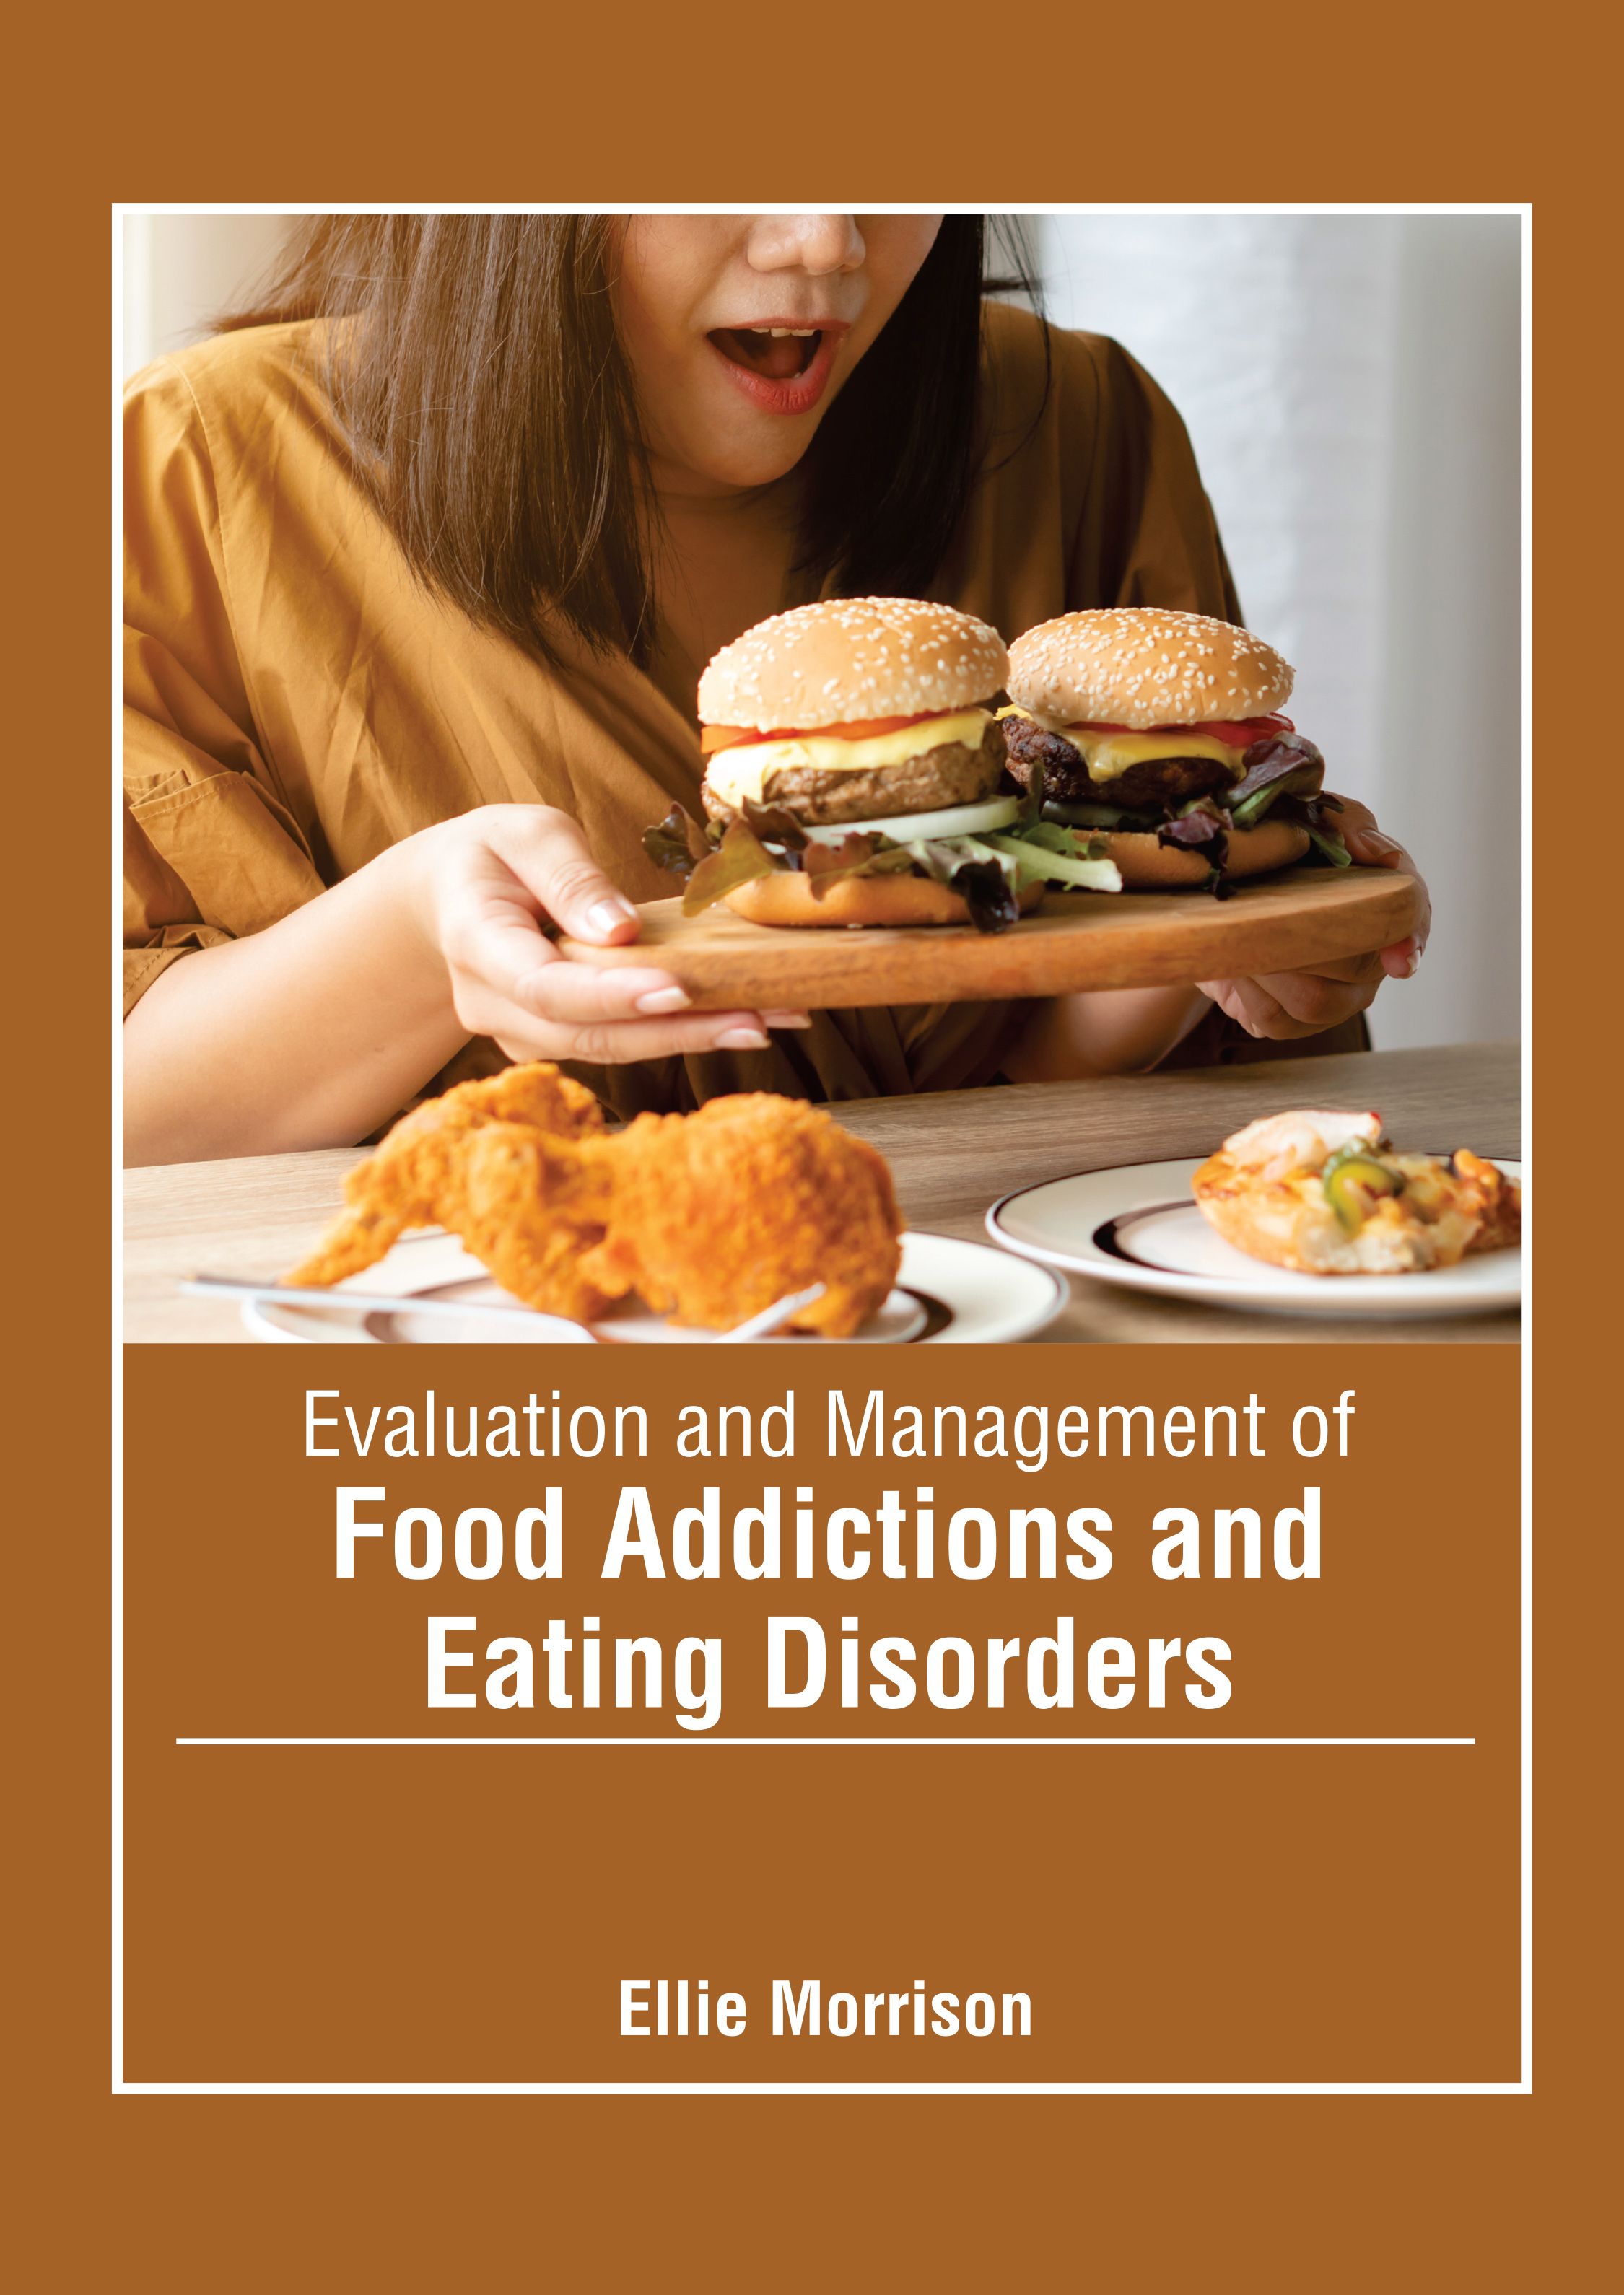 EVALUATION AND MANAGEMENT OF FOOD ADDICTIONS AND EATING DISORDERS